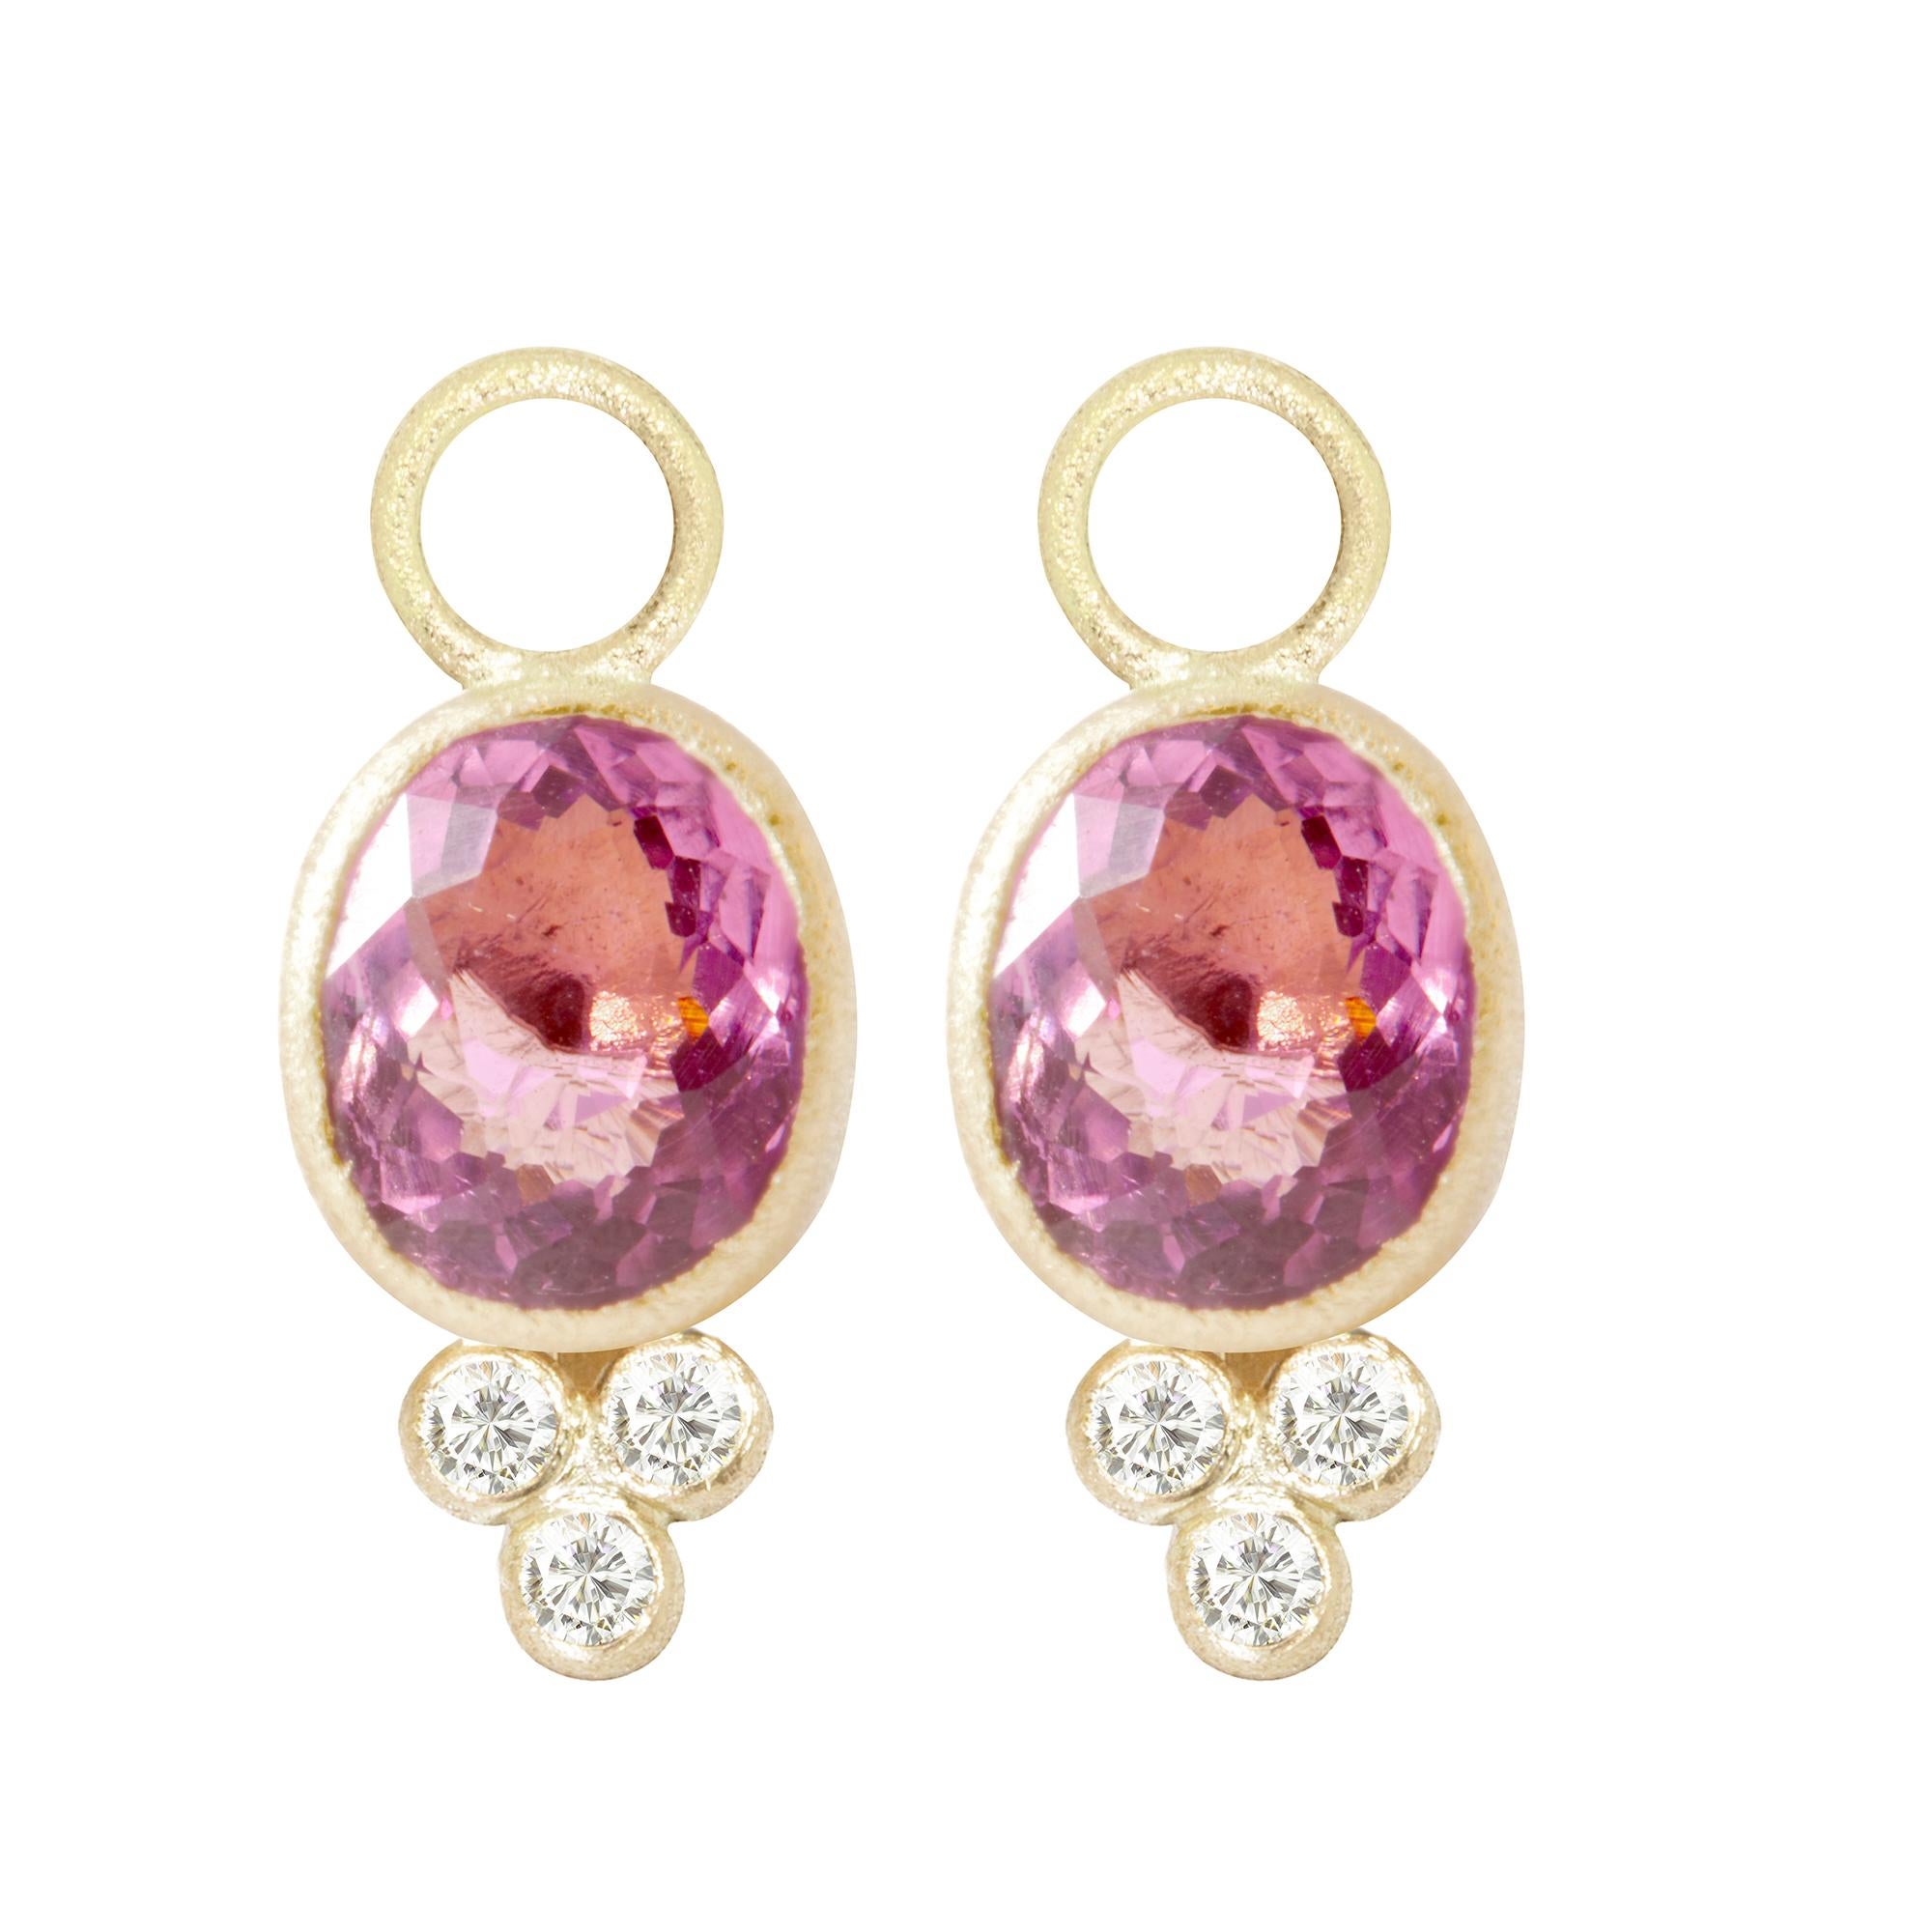 Mekong Med Moonstone Oxidized and Lilly Pink Tourmaline 18 Karat Gold Earrings In New Condition For Sale In Denver, CO